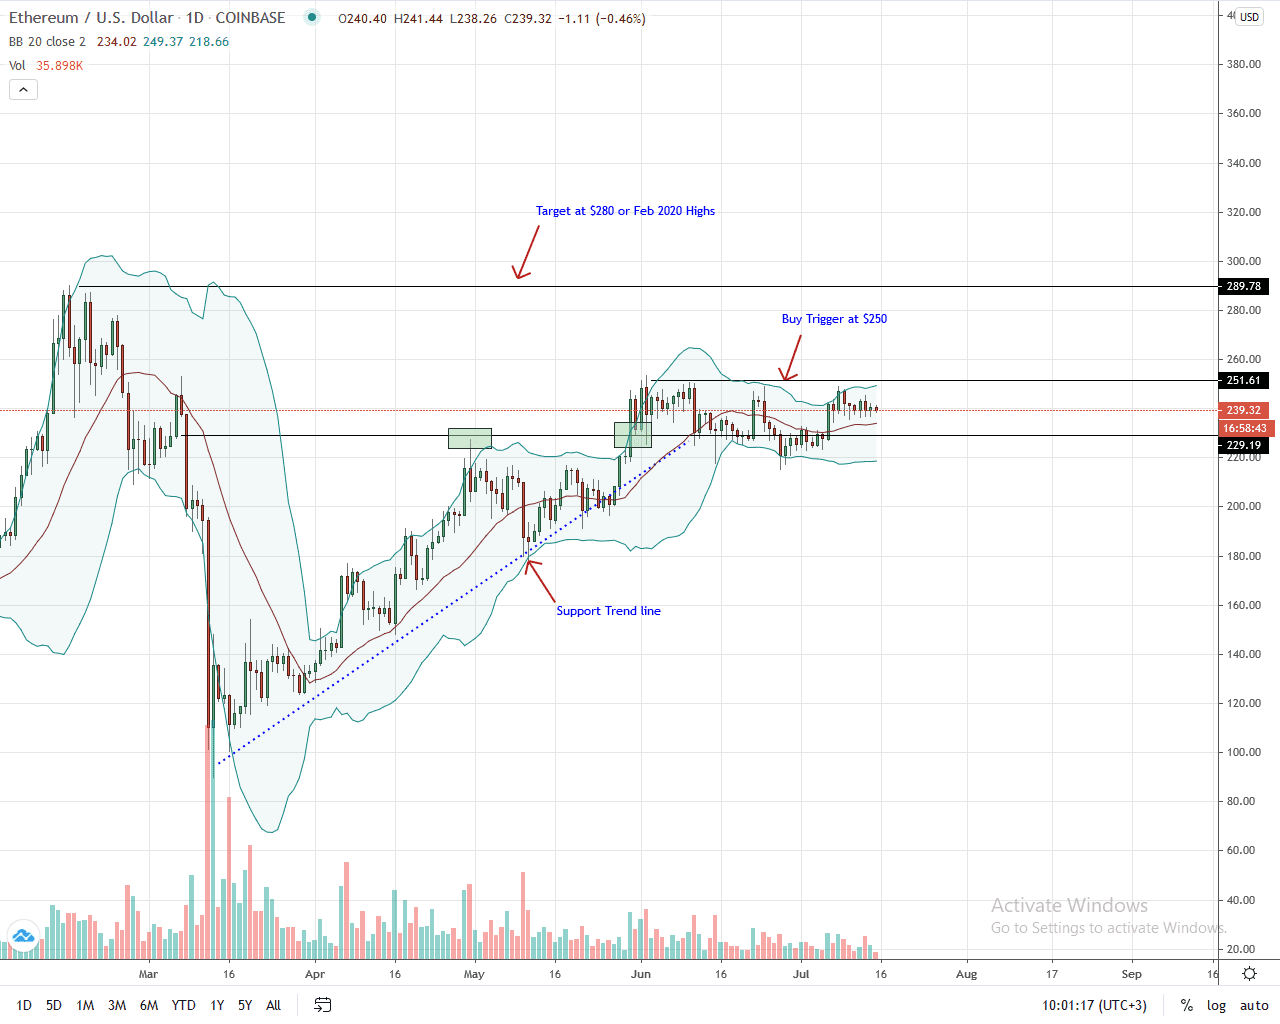 Ethereum Daily Chart for July 15, 2020